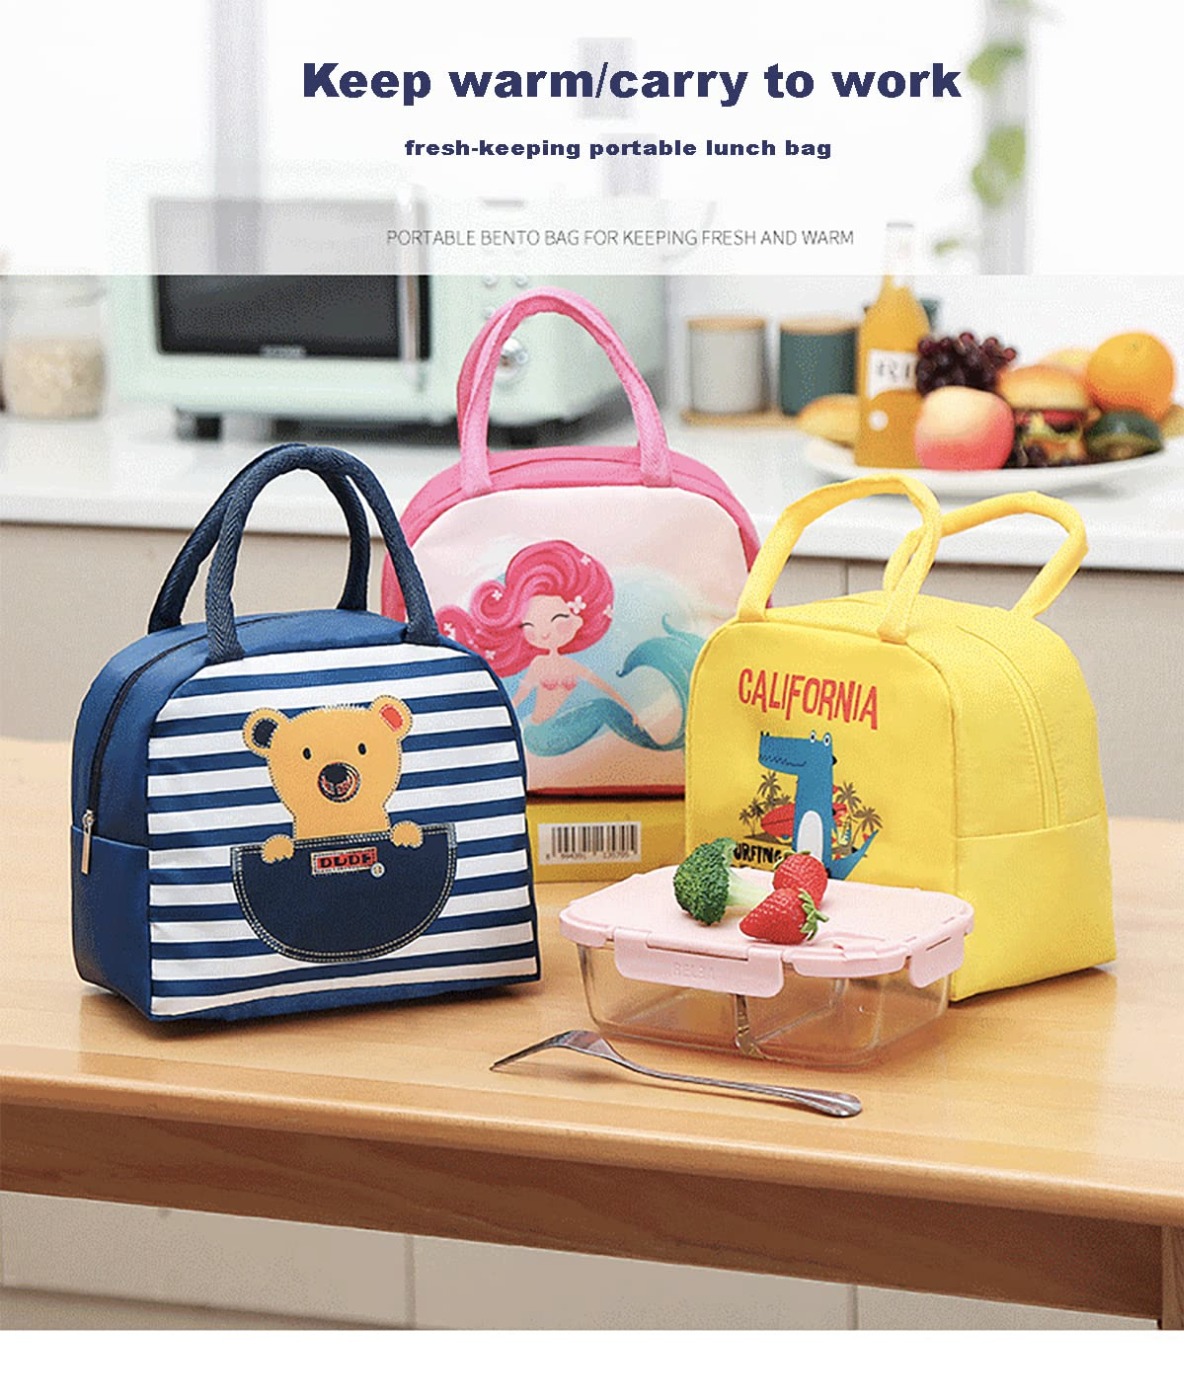 nsulated Lunch Box Bag Soft Leakproof Lunch Bag for Kids Men Women, Durable Thermal Lunch Pail for School Work Office Cartoon Prints